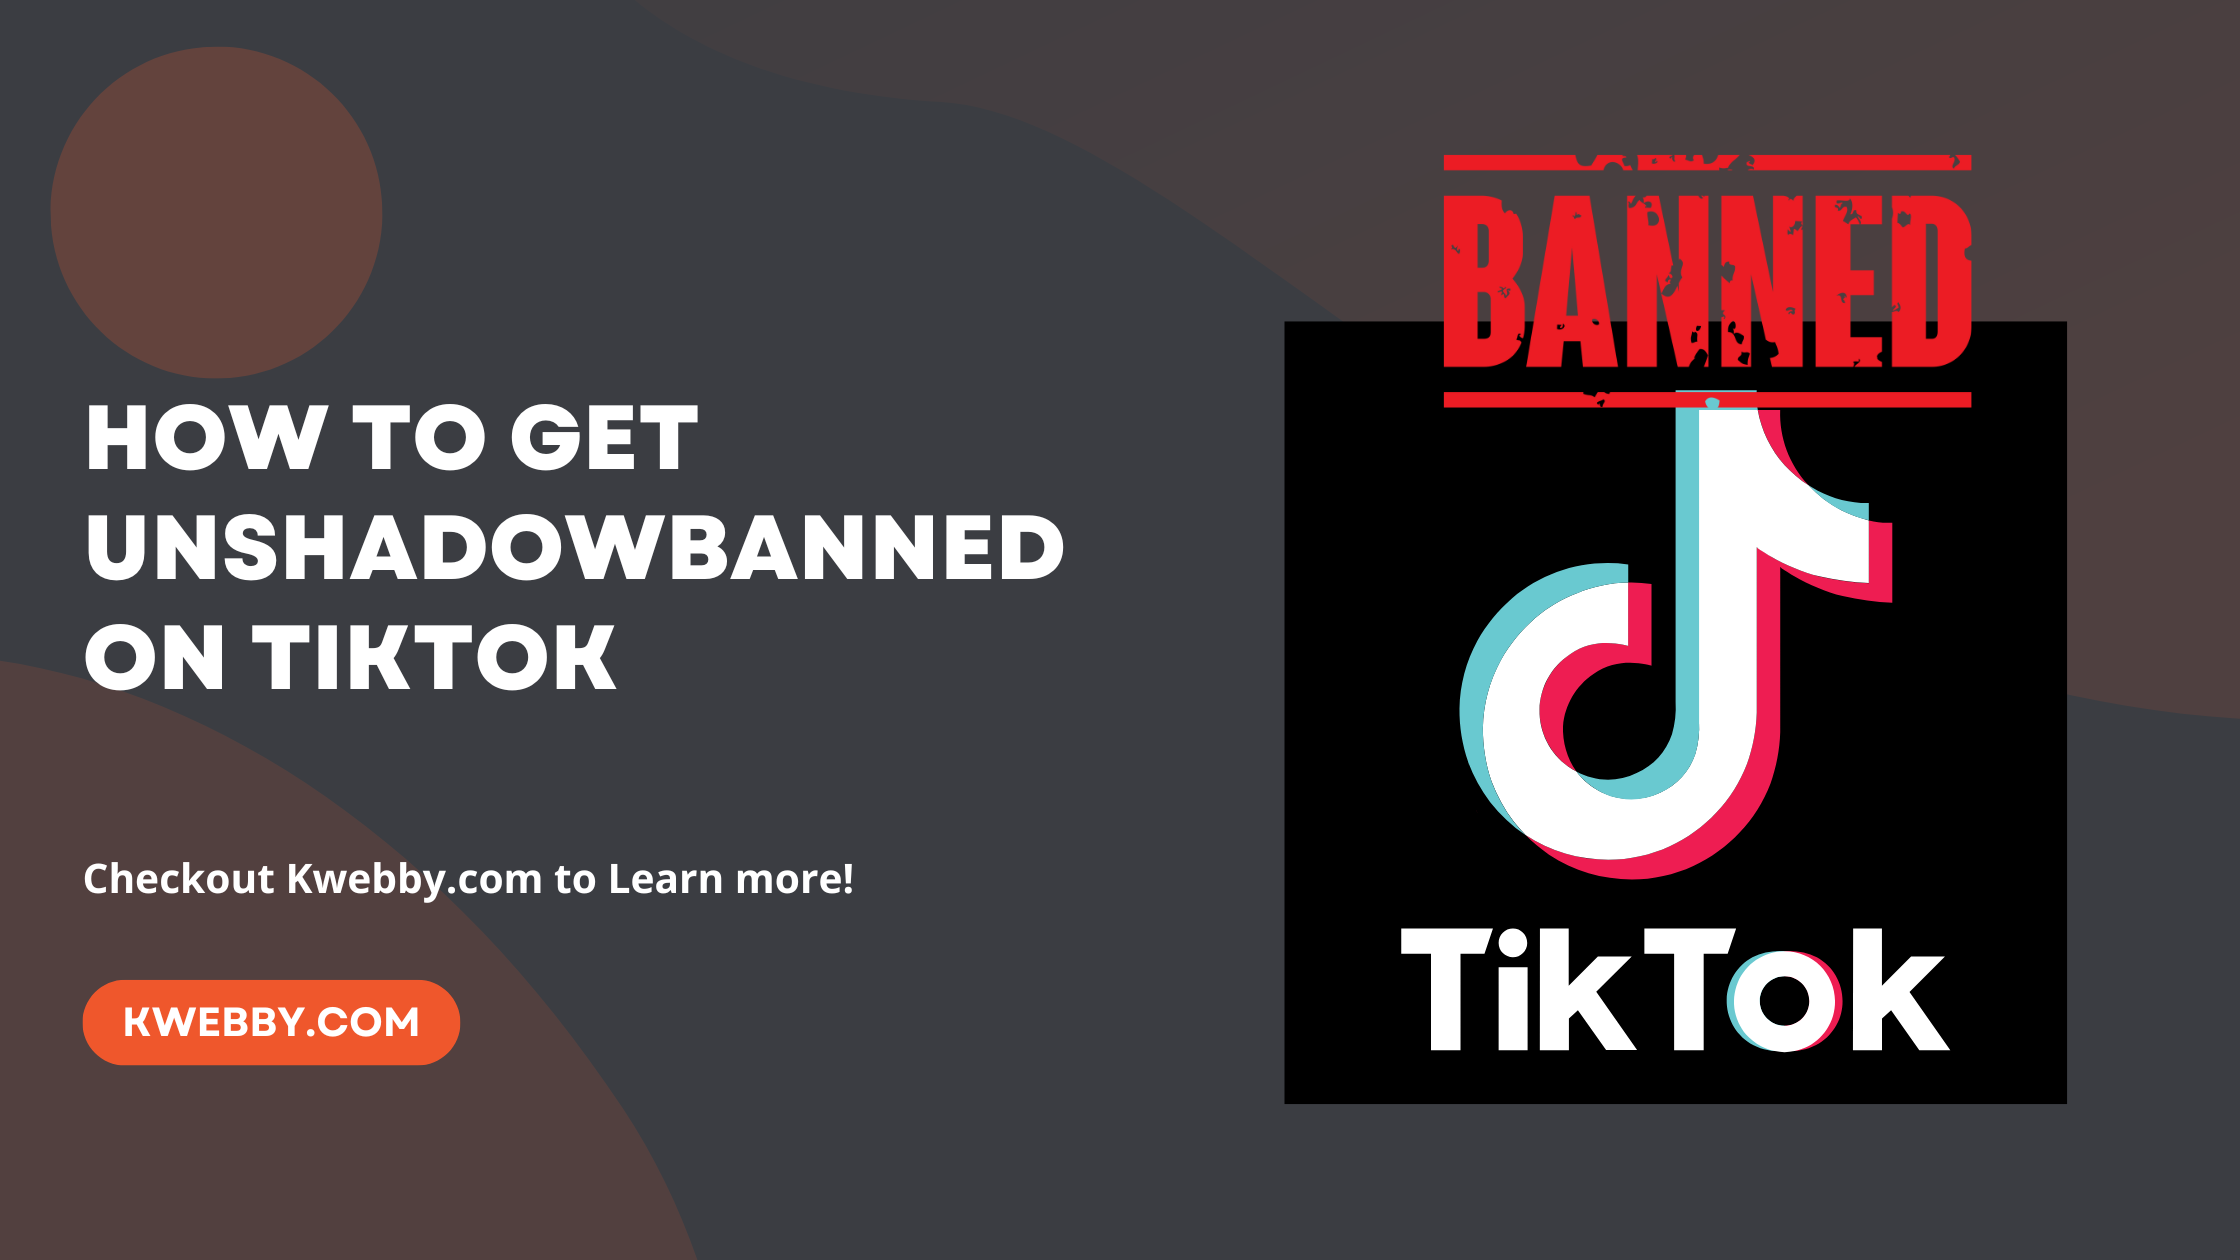 How to get Unshadowbanned on Tiktok